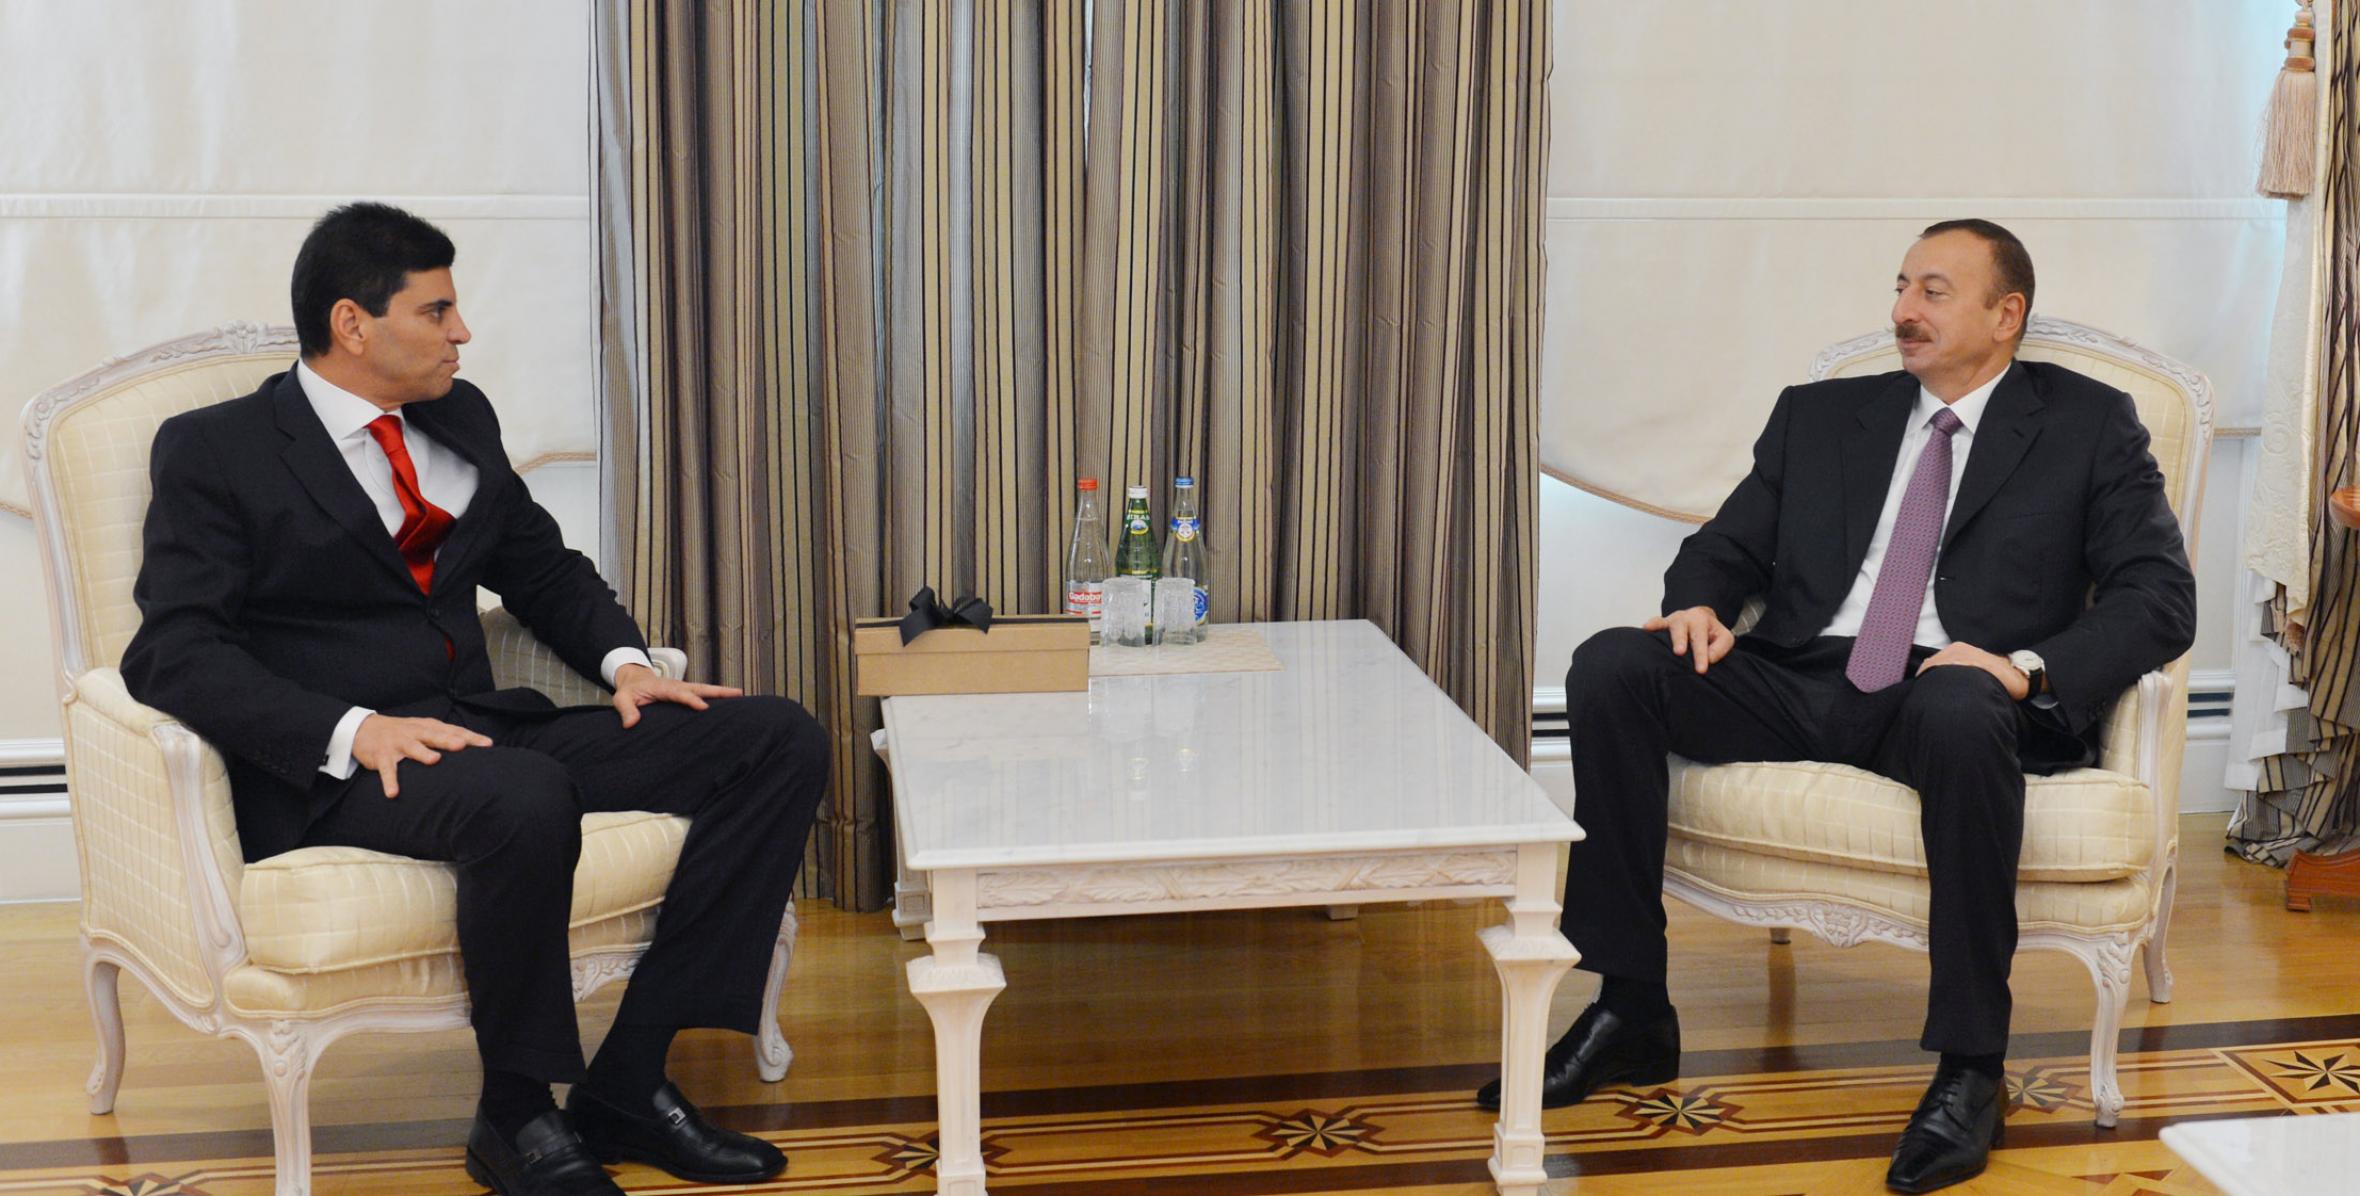 Ilham Aliyev received the chairman of the Brazil-Azerbaijan Friendship Group and an authorized representative of the Chamber of Deputies